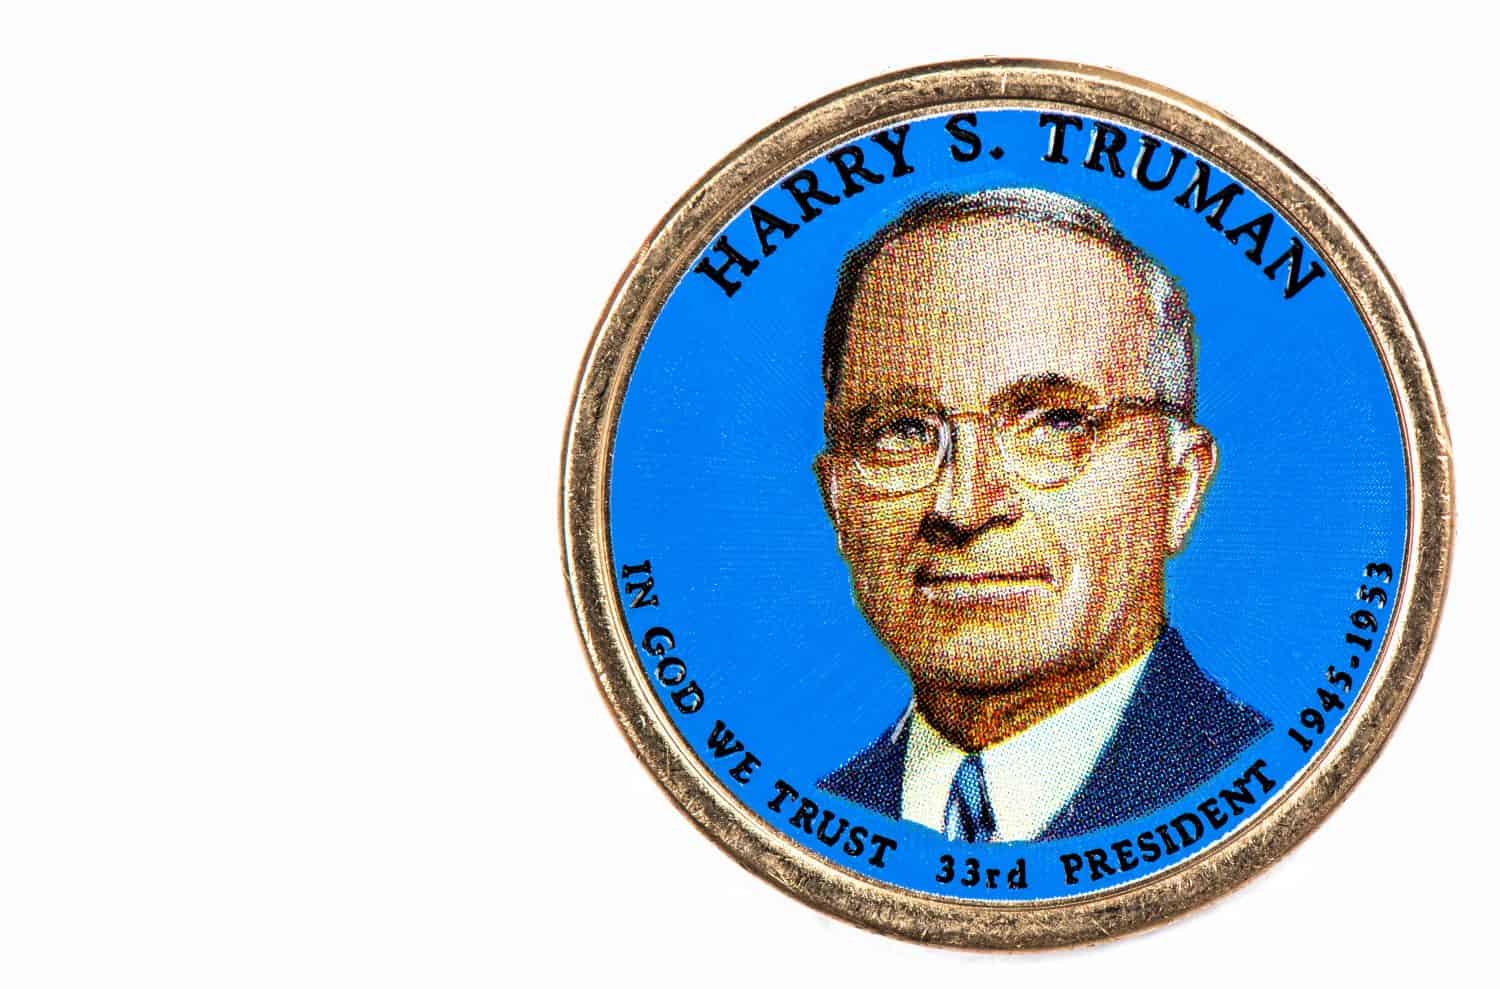 Harry S. Truman Presidential Dollar, USA coin a portrait image of HARRY S. TRUMAN in God We Trust 33rd PRESIDENT 1945-1953 on $1 United Staten of Amekica, Close Up UNC Uncirculated - Collection